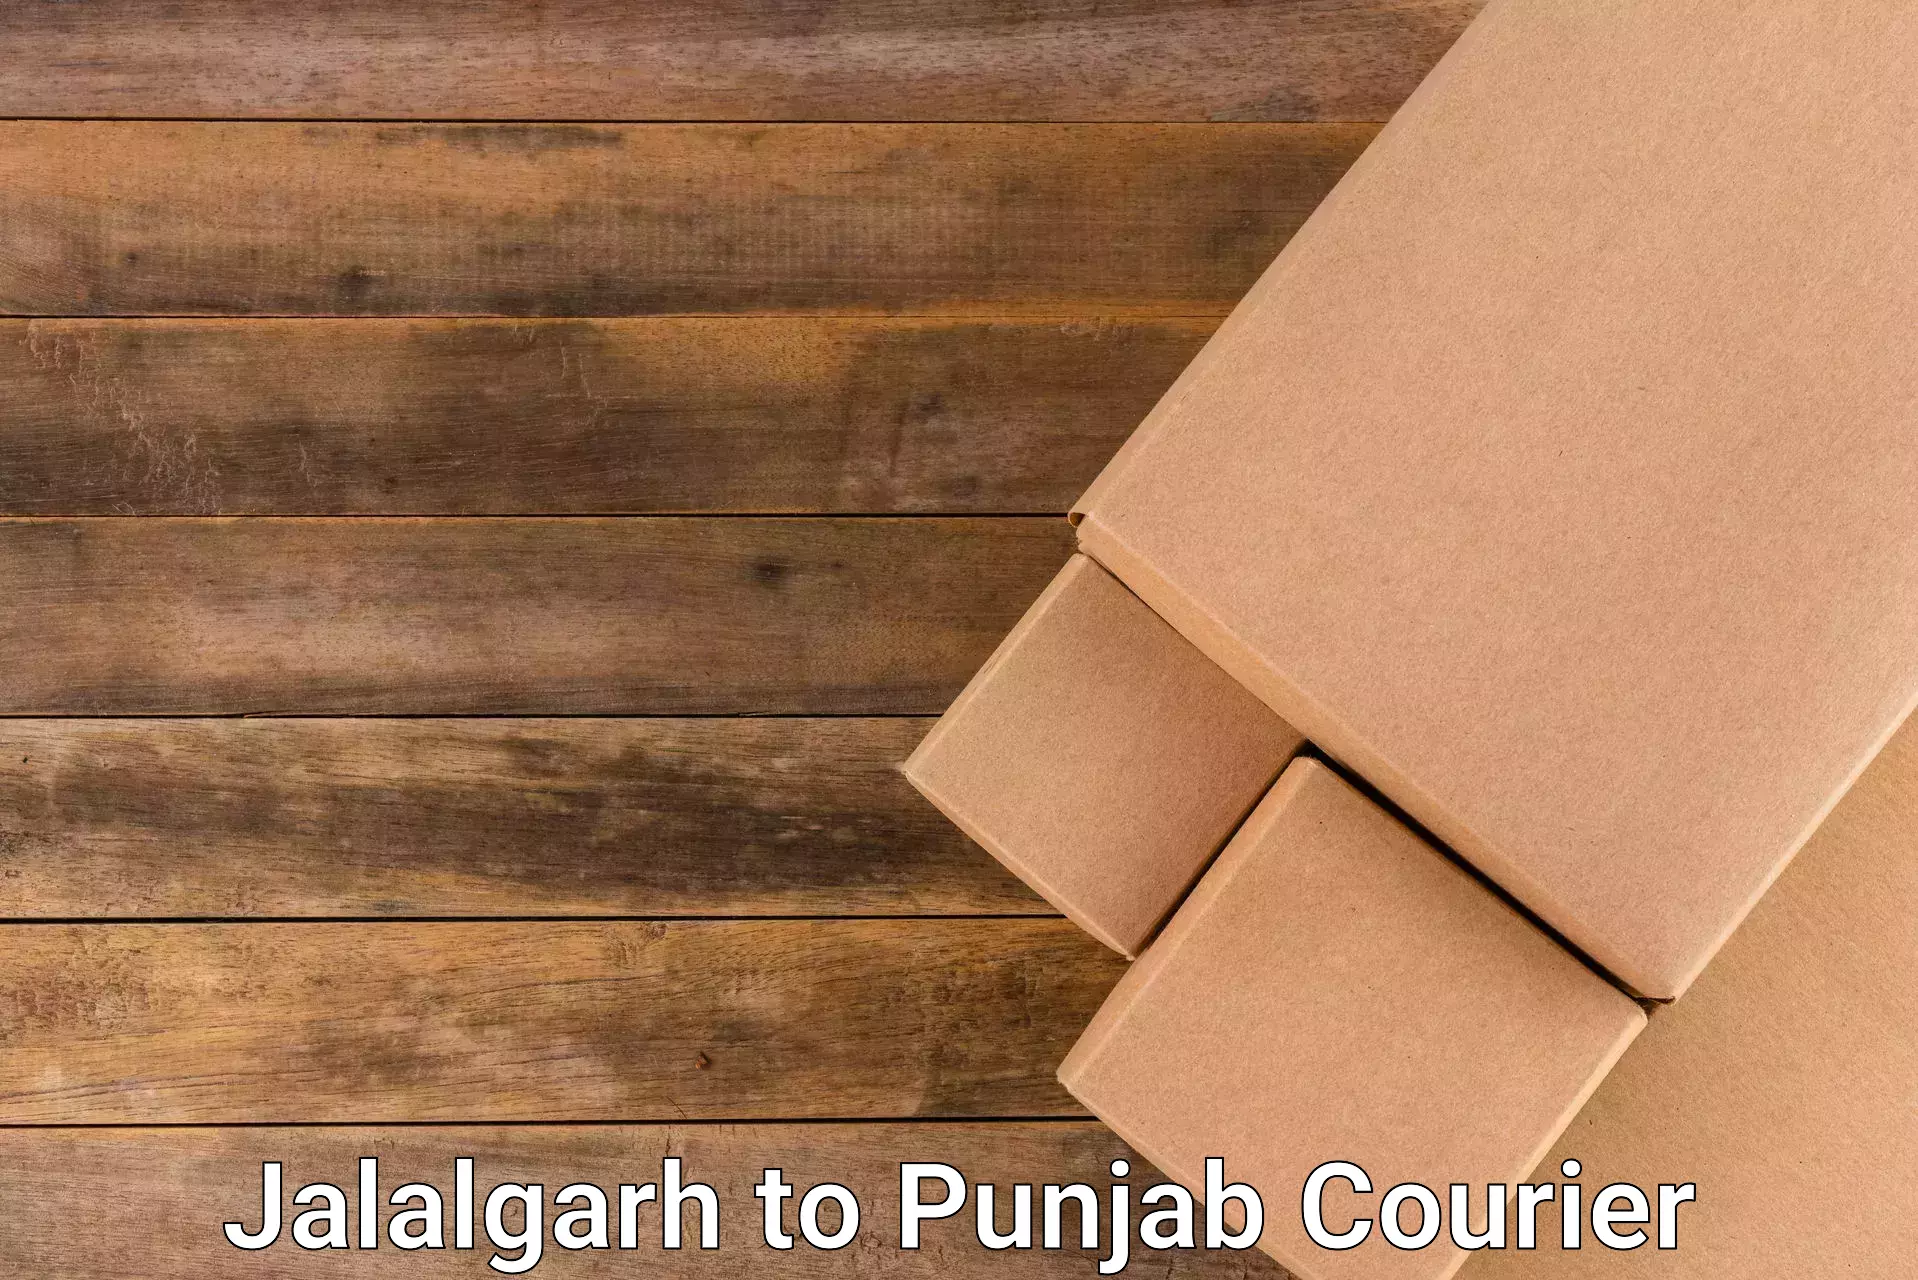 Courier service booking Jalalgarh to Moga